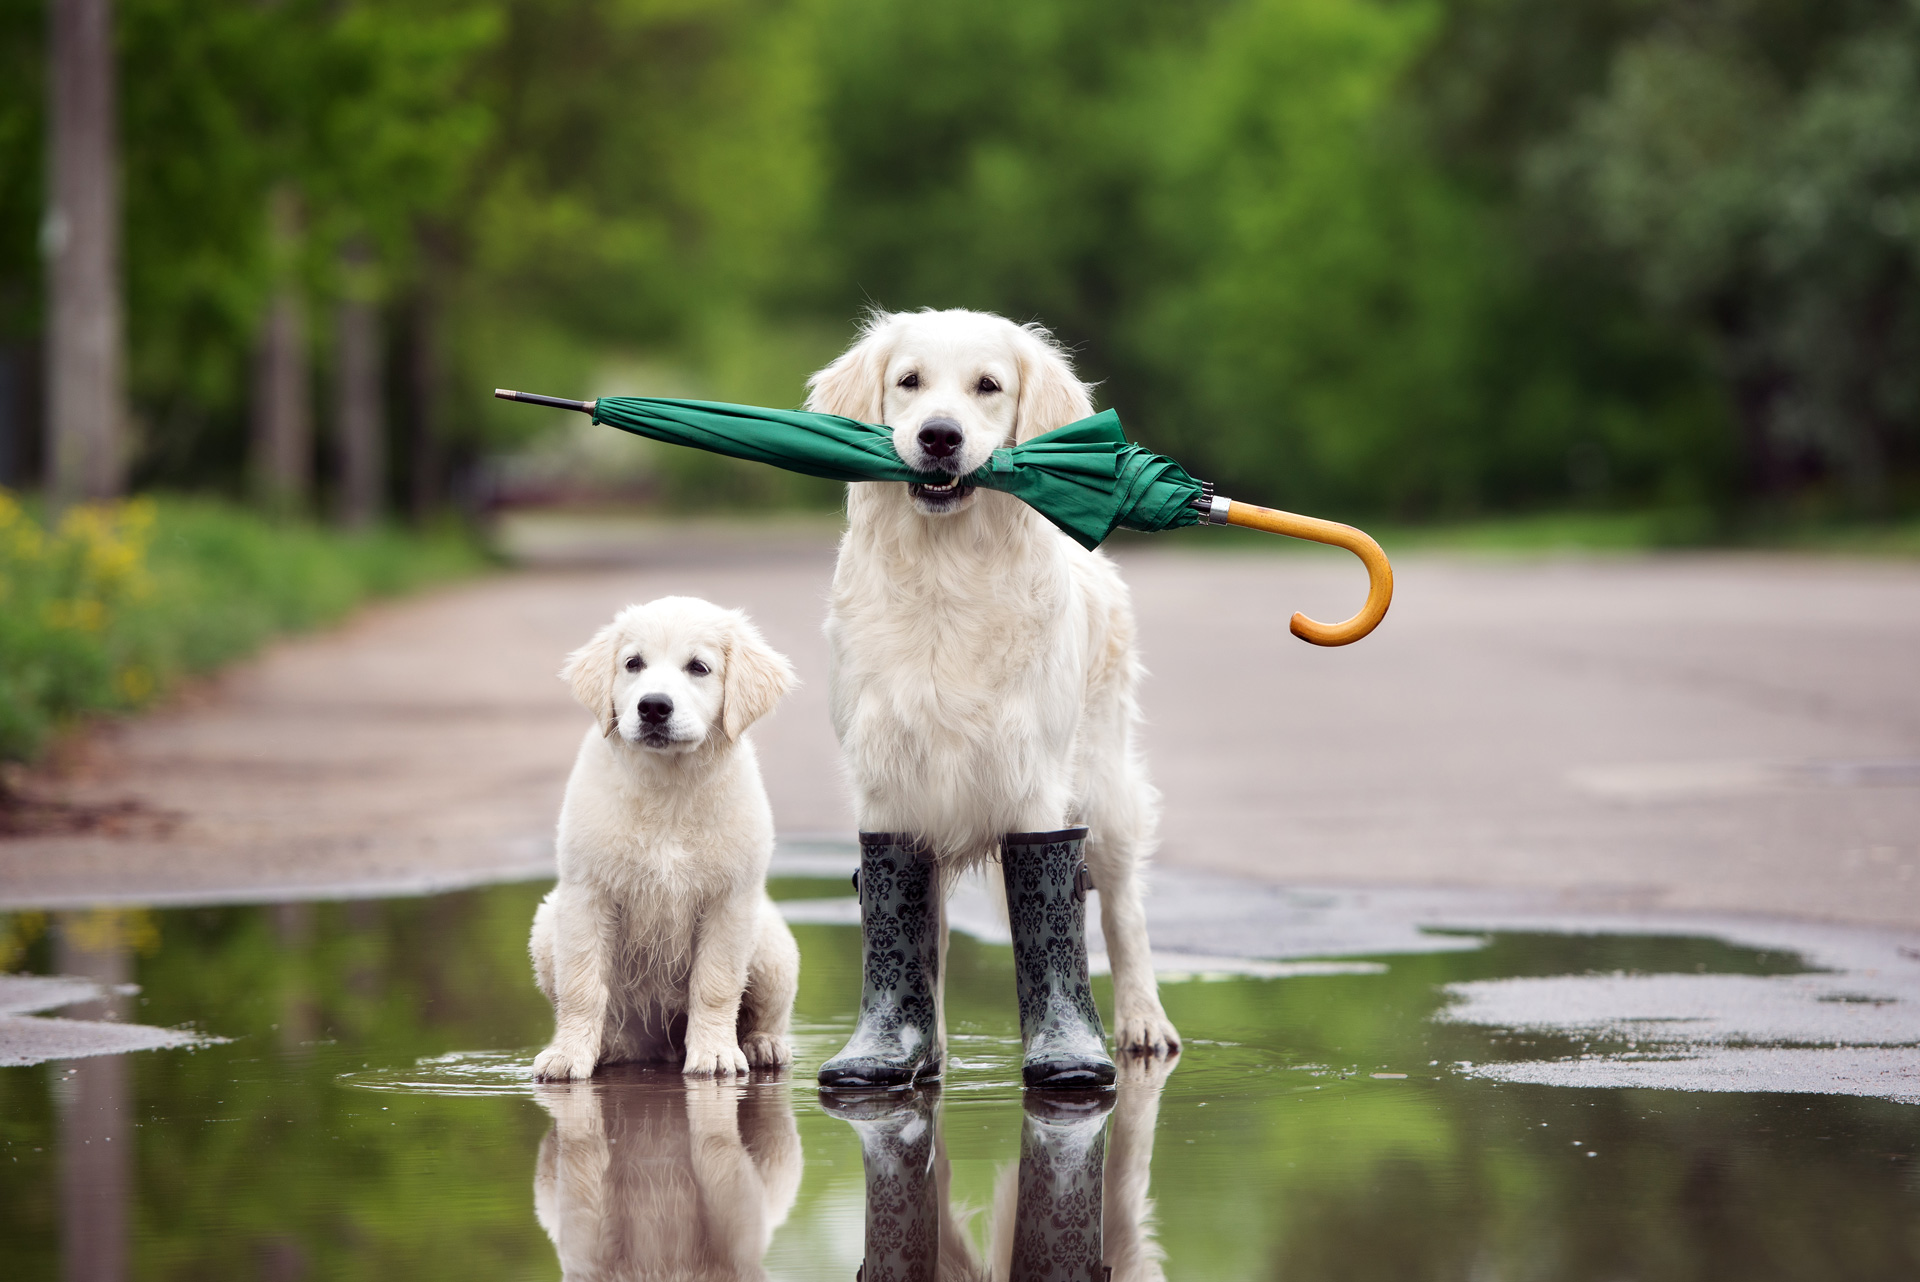 Two golden retrievers standing on a puddle. One of them is holding an umbrella